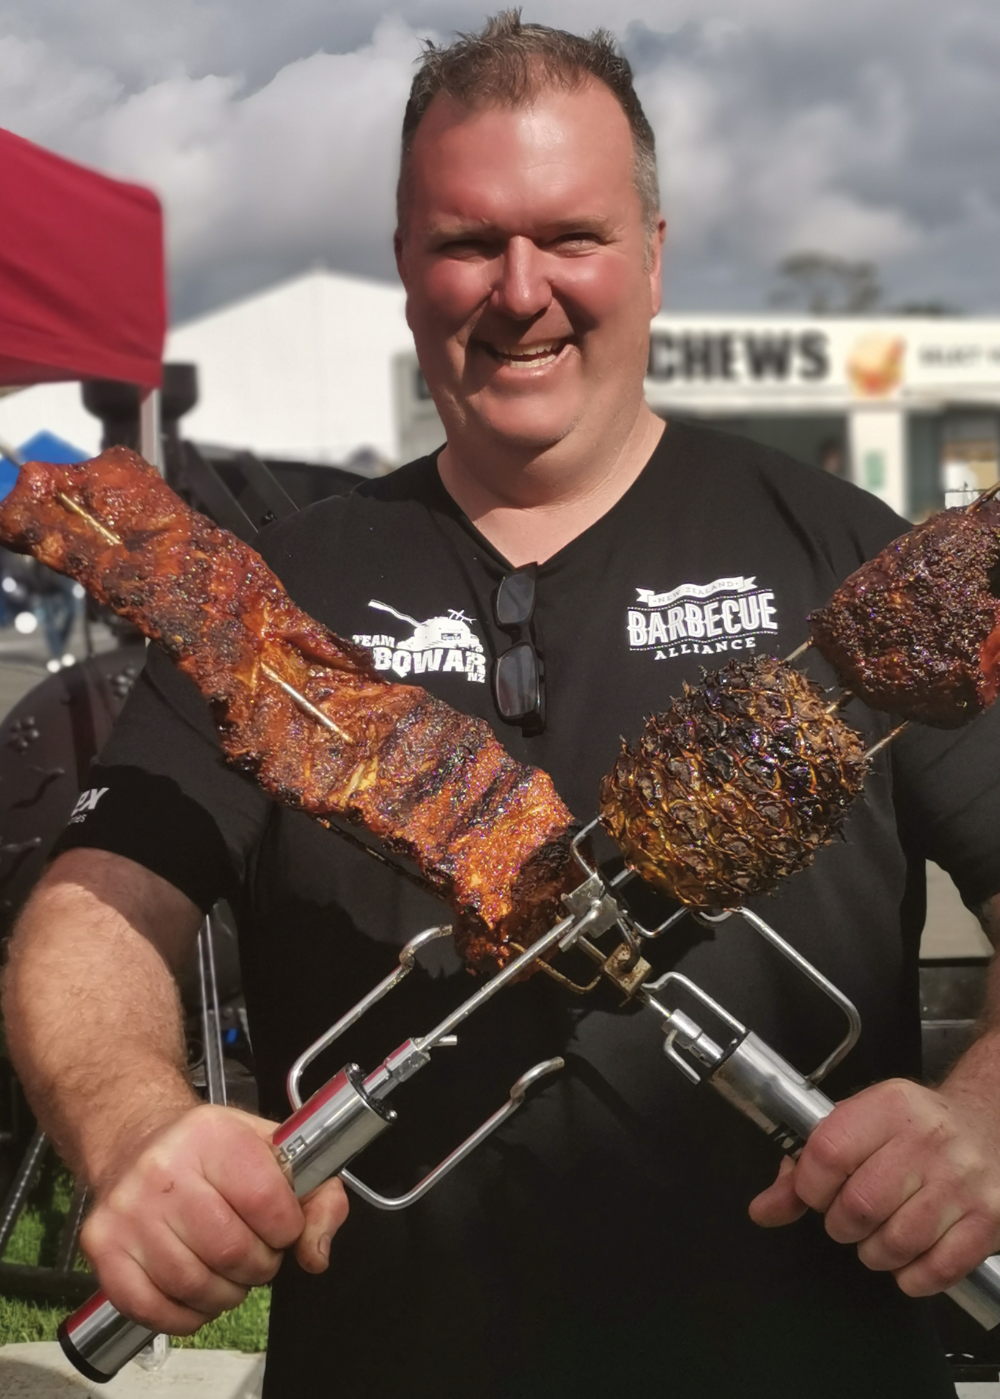 Wayne Dil BBQ Mag December issue pinup... look at that smile